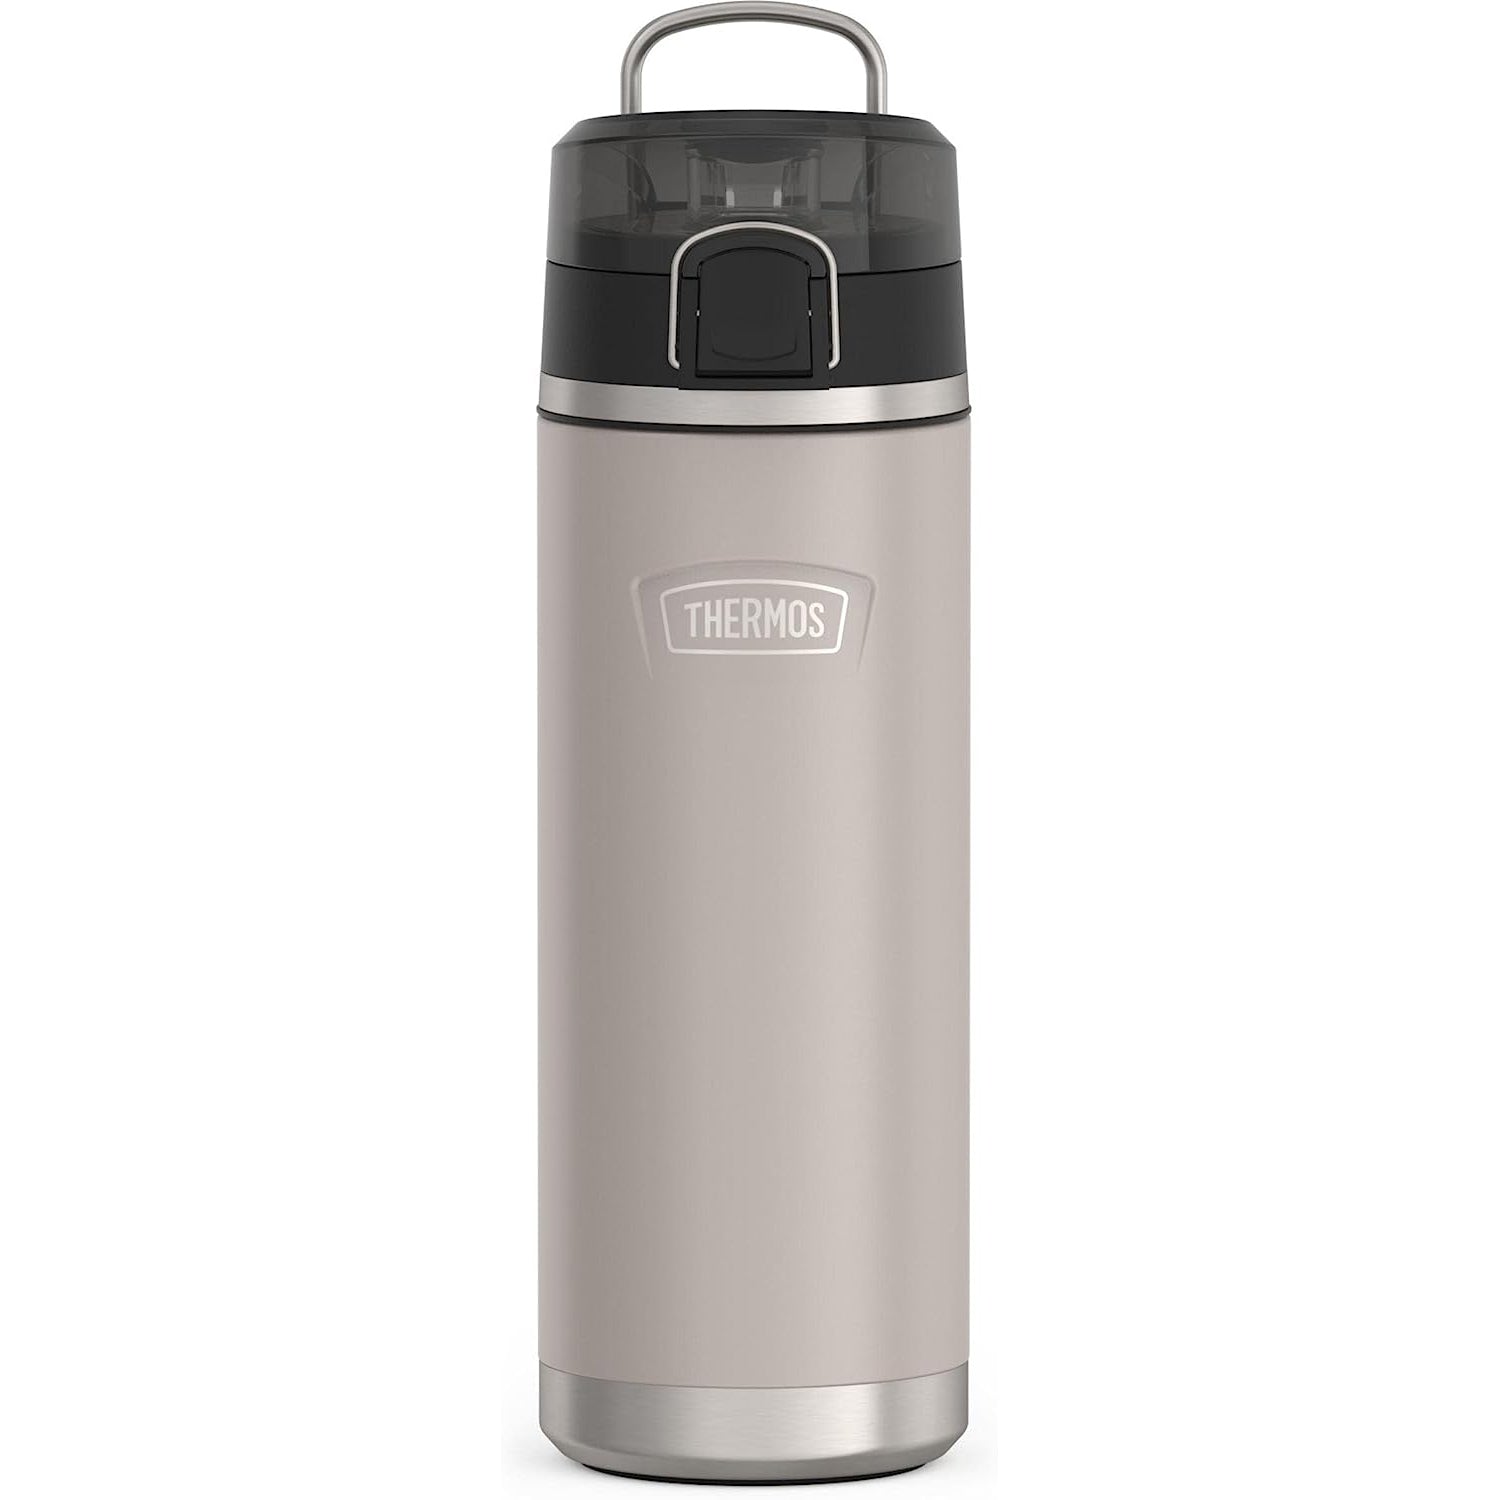 ICON SERIES BY THERMOS Stainless Steel Water Bottle with Spout 24 Ounce, Sandstone